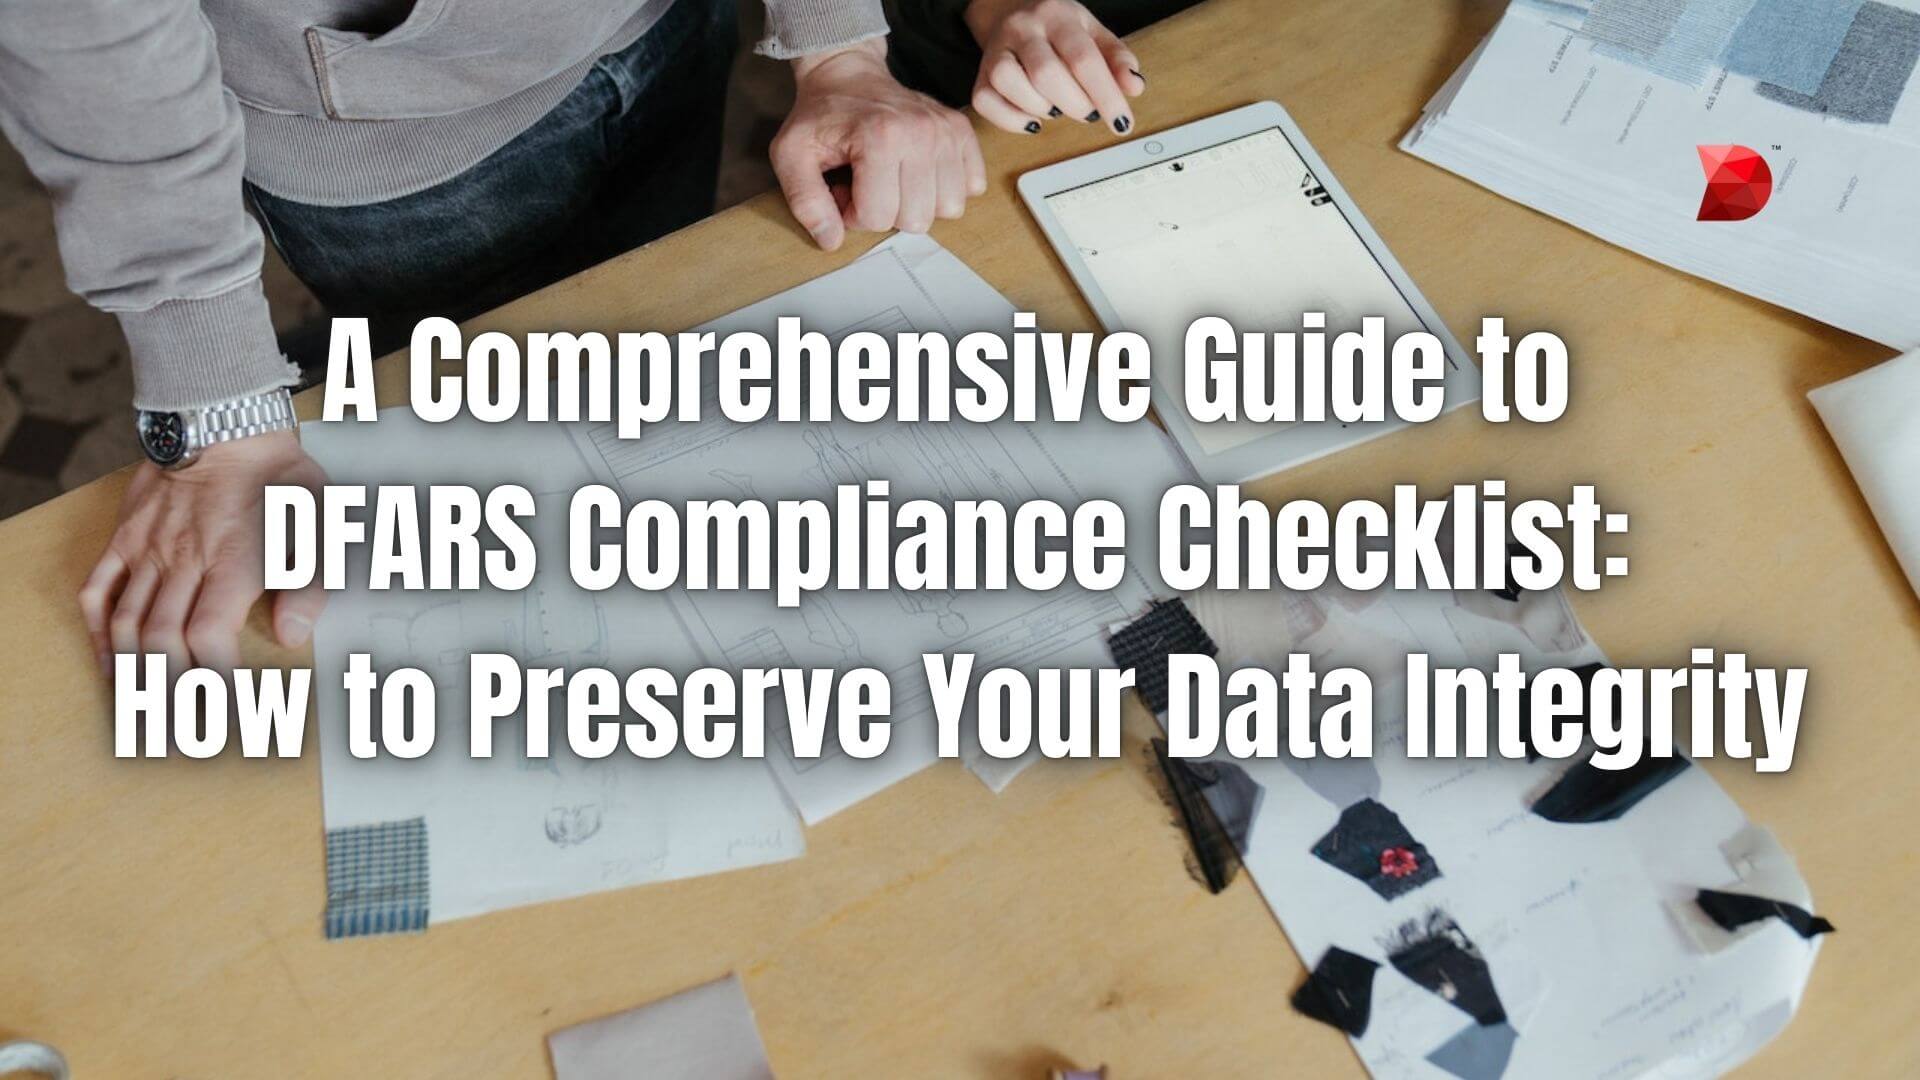 A Comprehensive Guide to DFARS Compliance Checklist How to Preserve Your Data Integrity